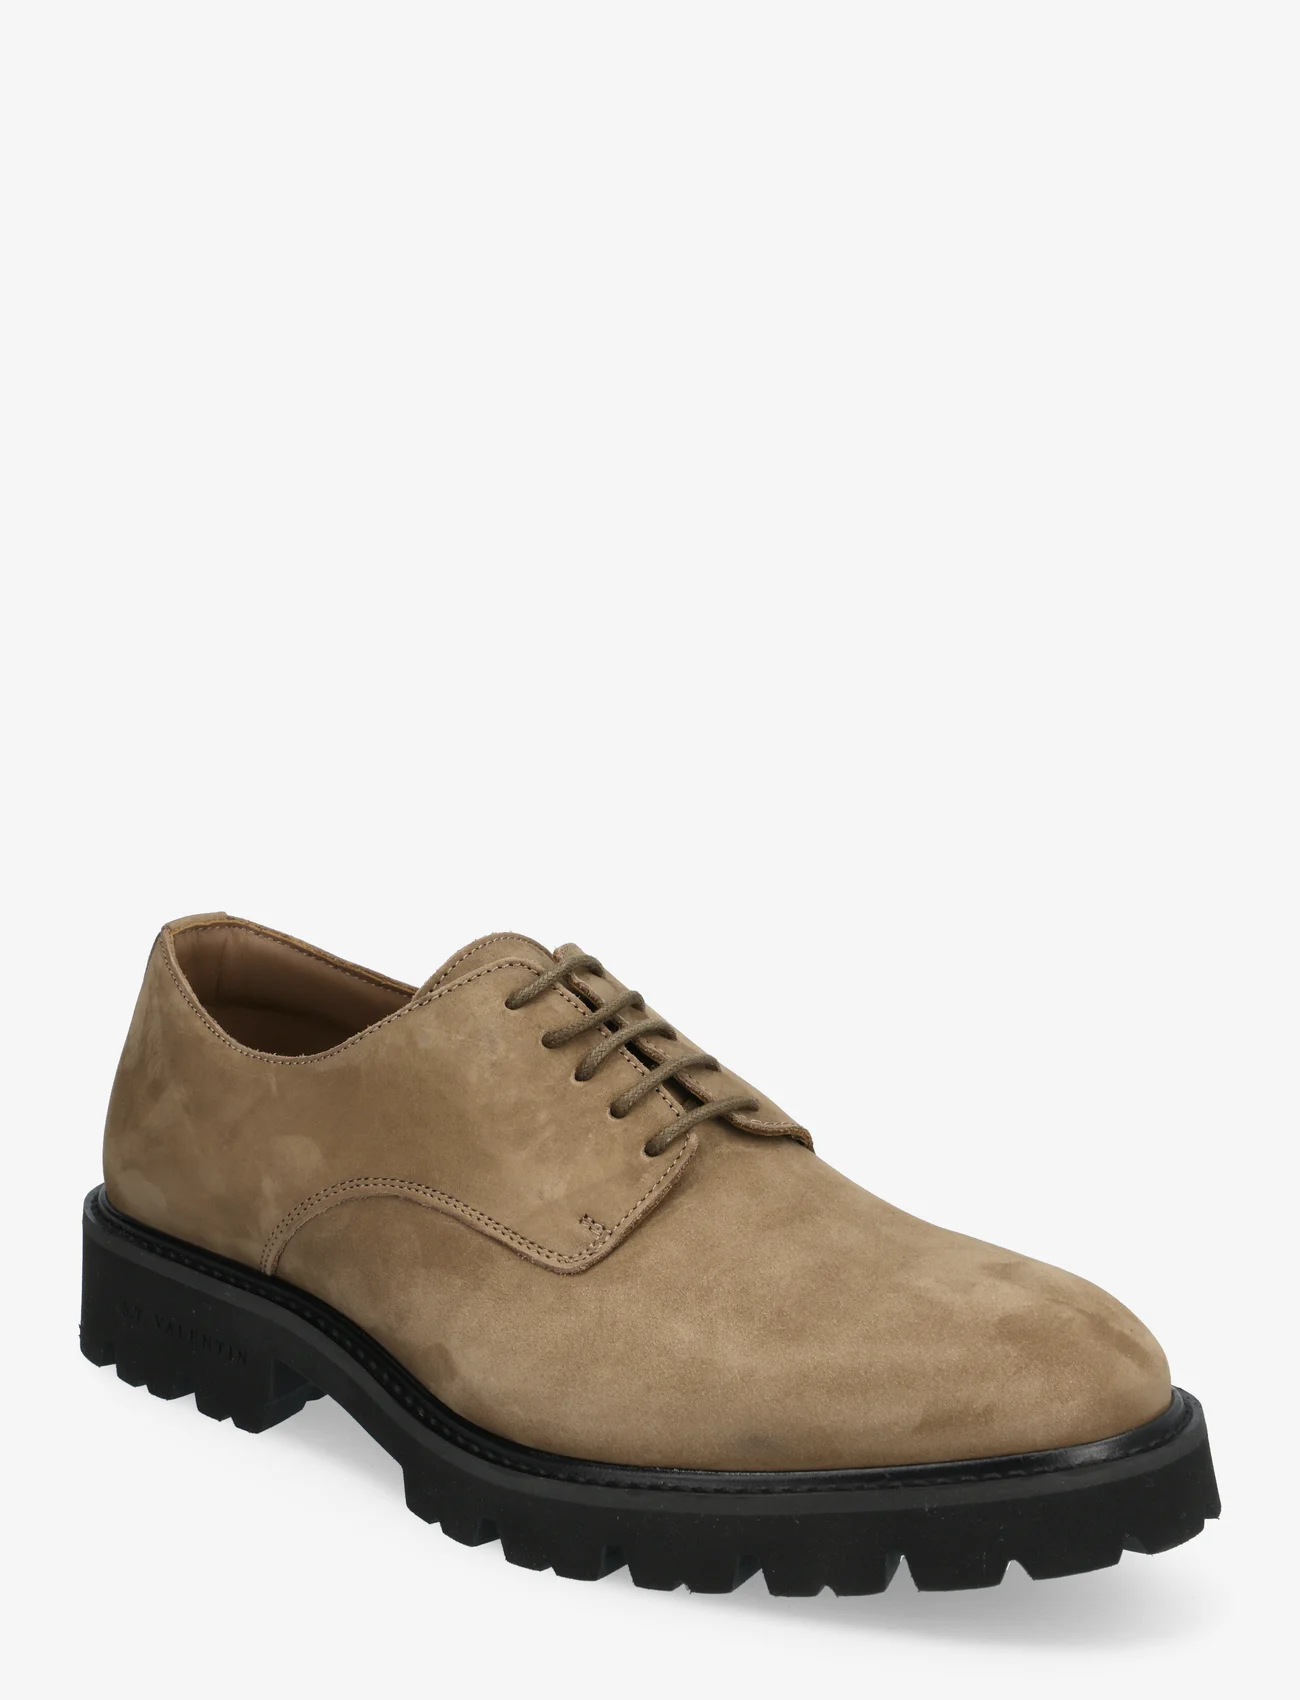 S.T. VALENTIN - Lightweight Derby - Grained leather - laced shoes - taupe - 0